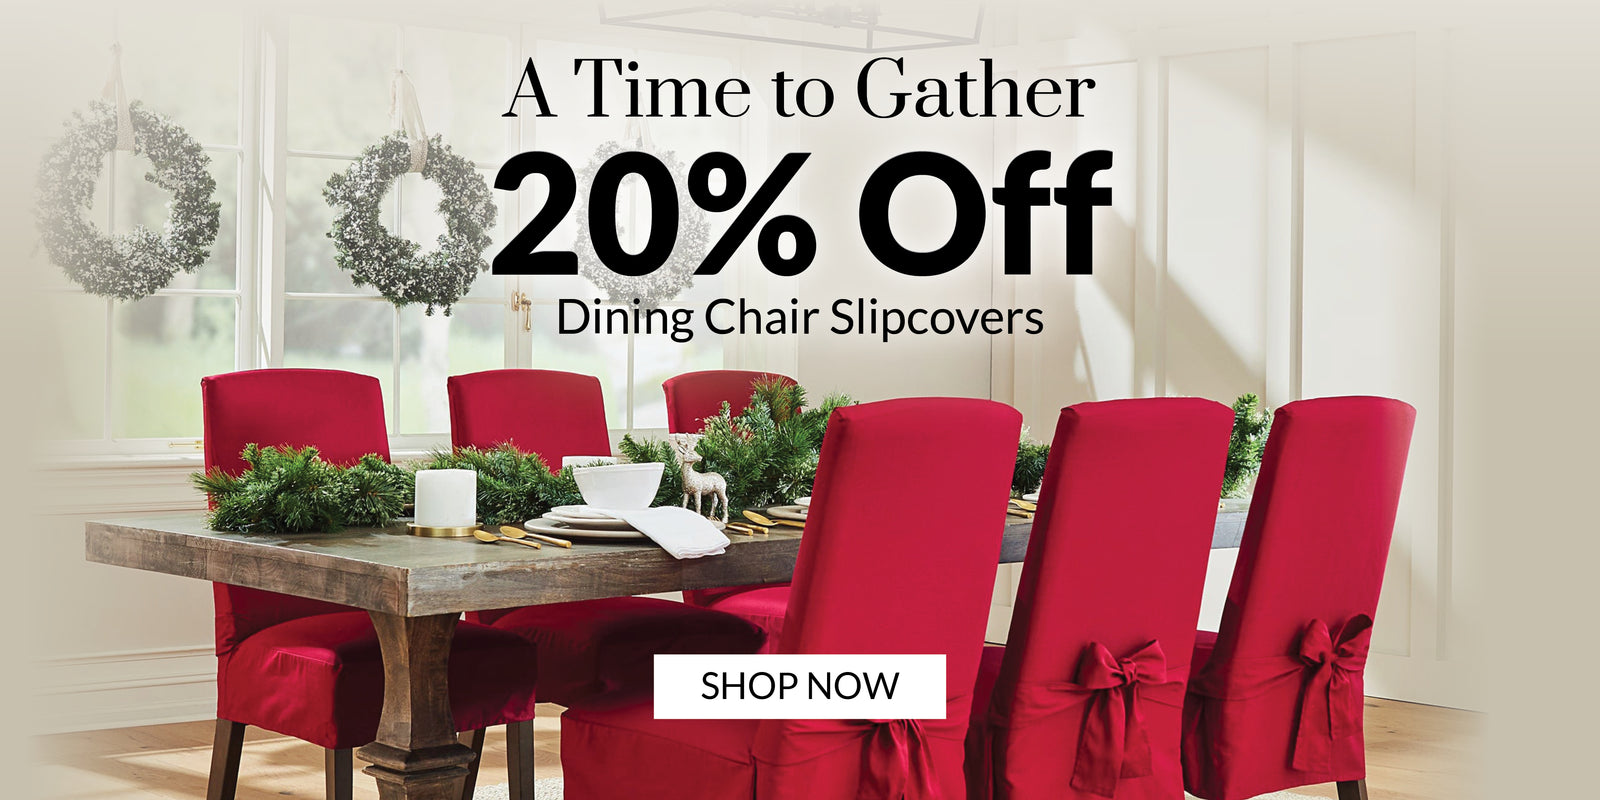 SF-Time-to-Gather-20-percent-off-Dining-Chair-Slipcovers-Hompage-Banner-Desktop